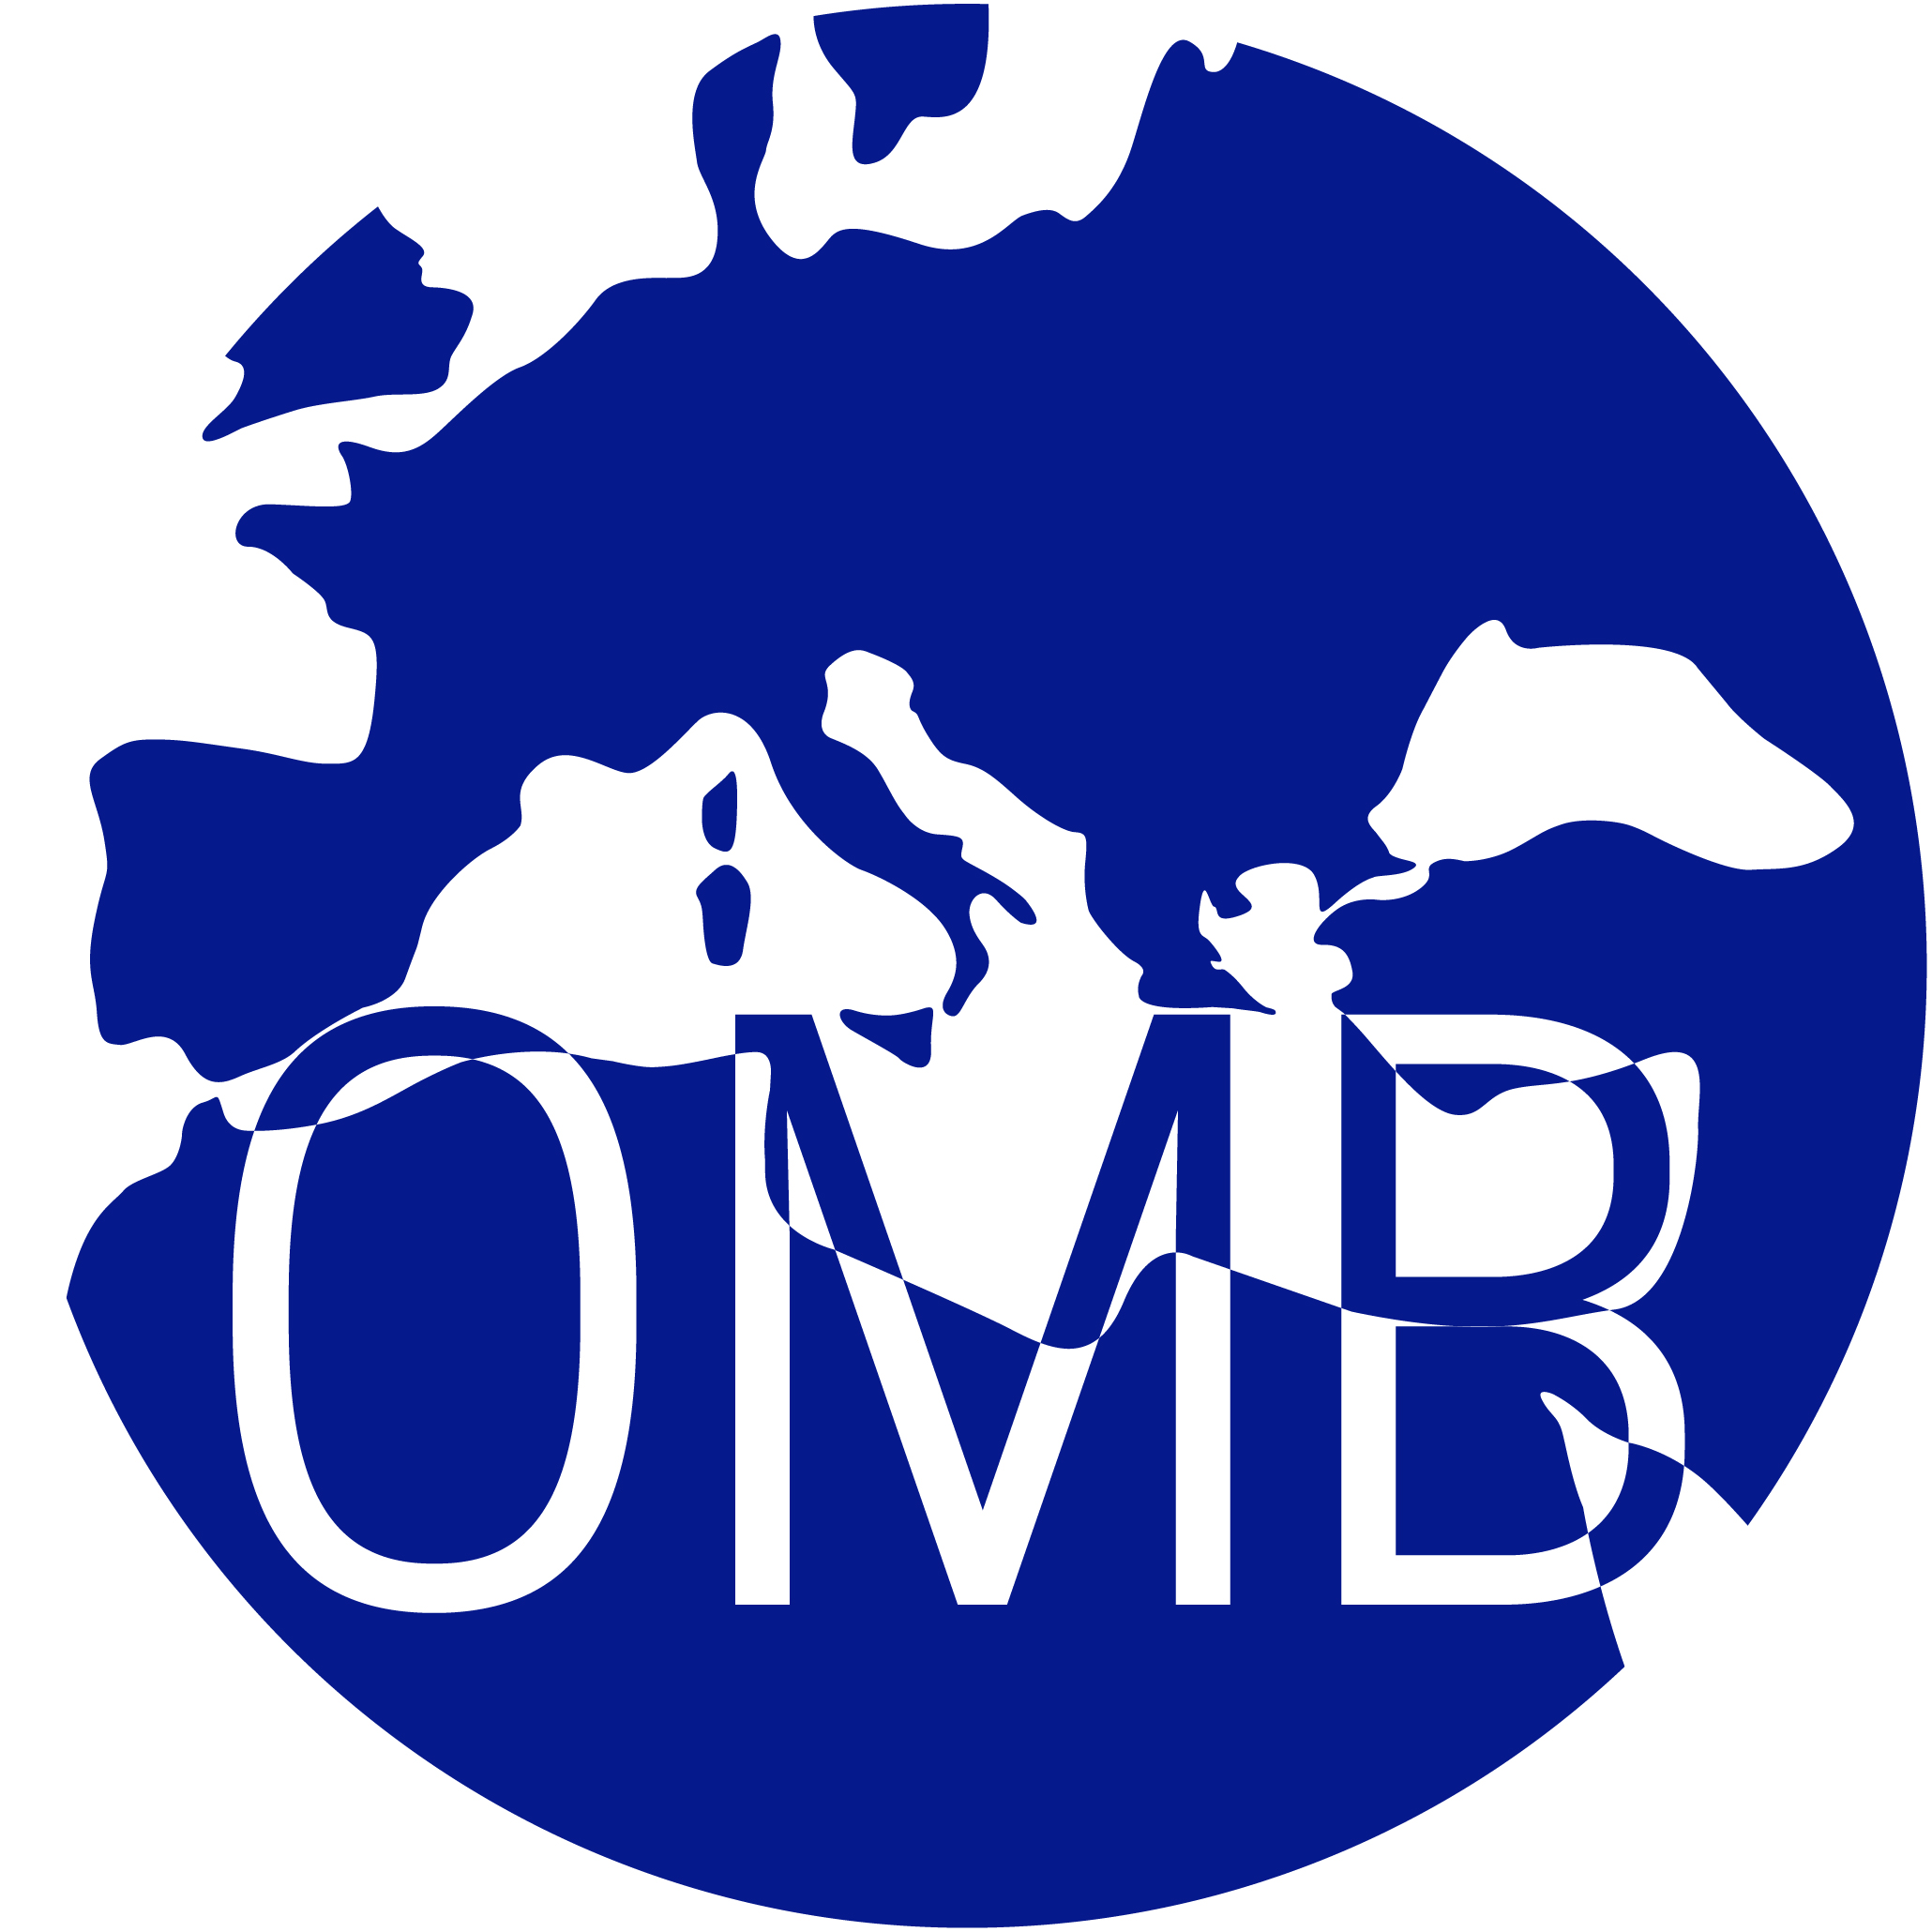 Applied Research Department - (OMB) Observatory of the Mediterranean Basin - FKZH Faculty, POLIS University of Tirana (Albania)